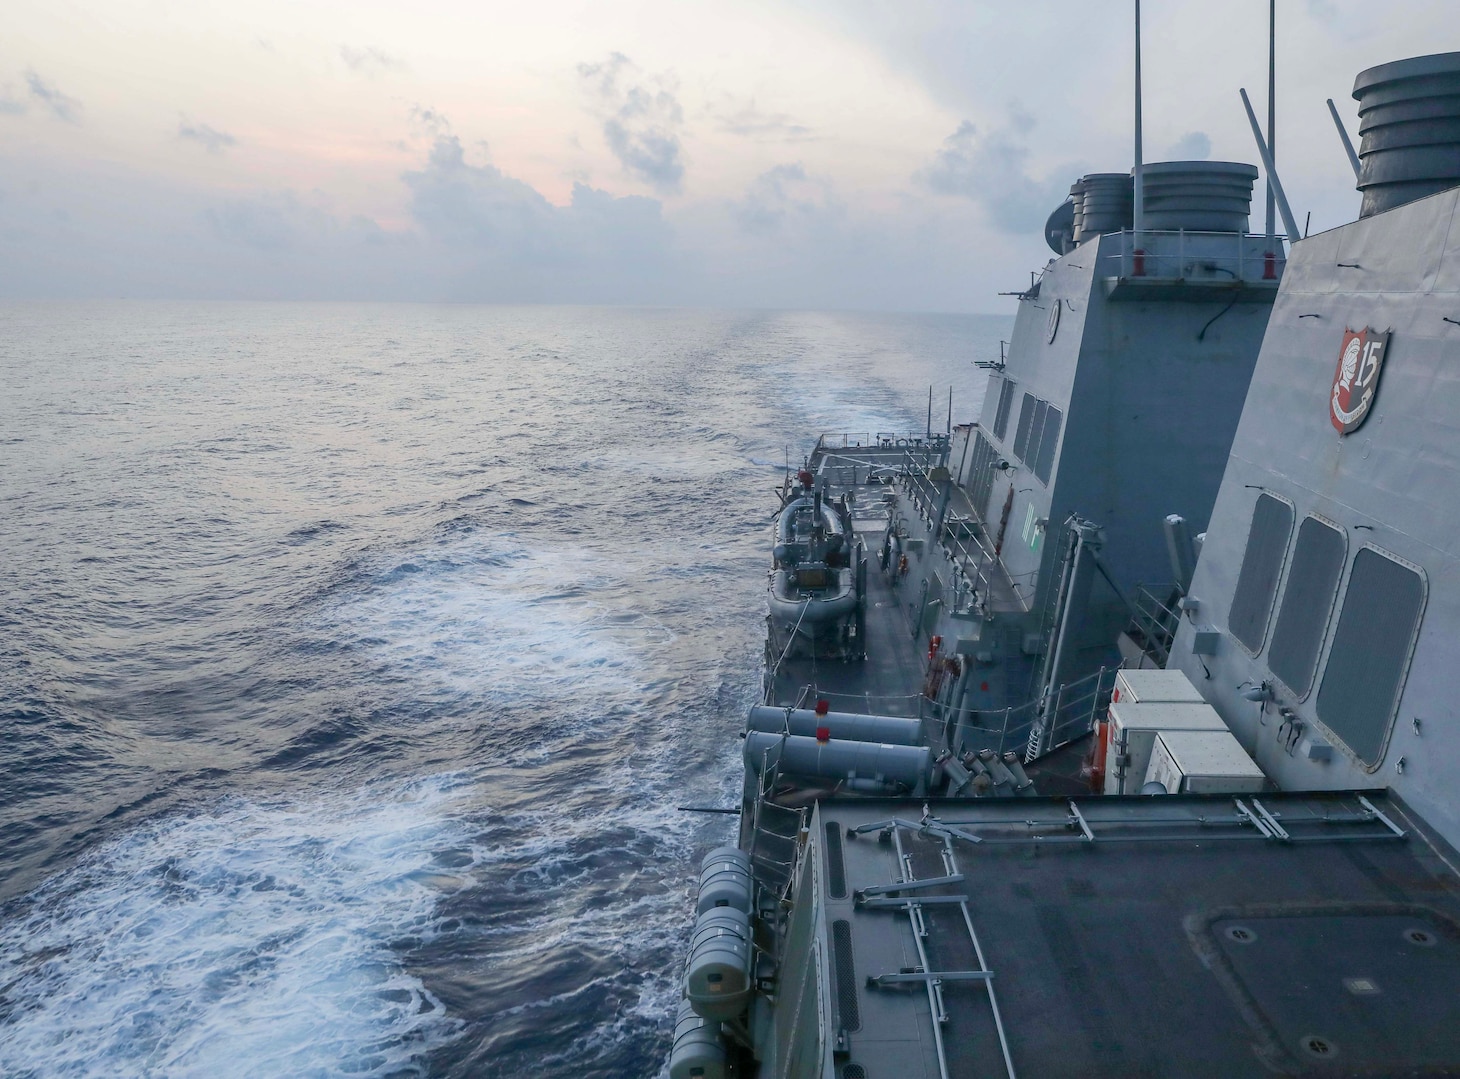 The Arleigh Burke-class guided-missile destroyer USS Milius (DDG 69) conducts routine underway operations. Milius is forward-deployed to the U.S. 7th Fleet area of operations in support of a free and open Indo-Pacific.